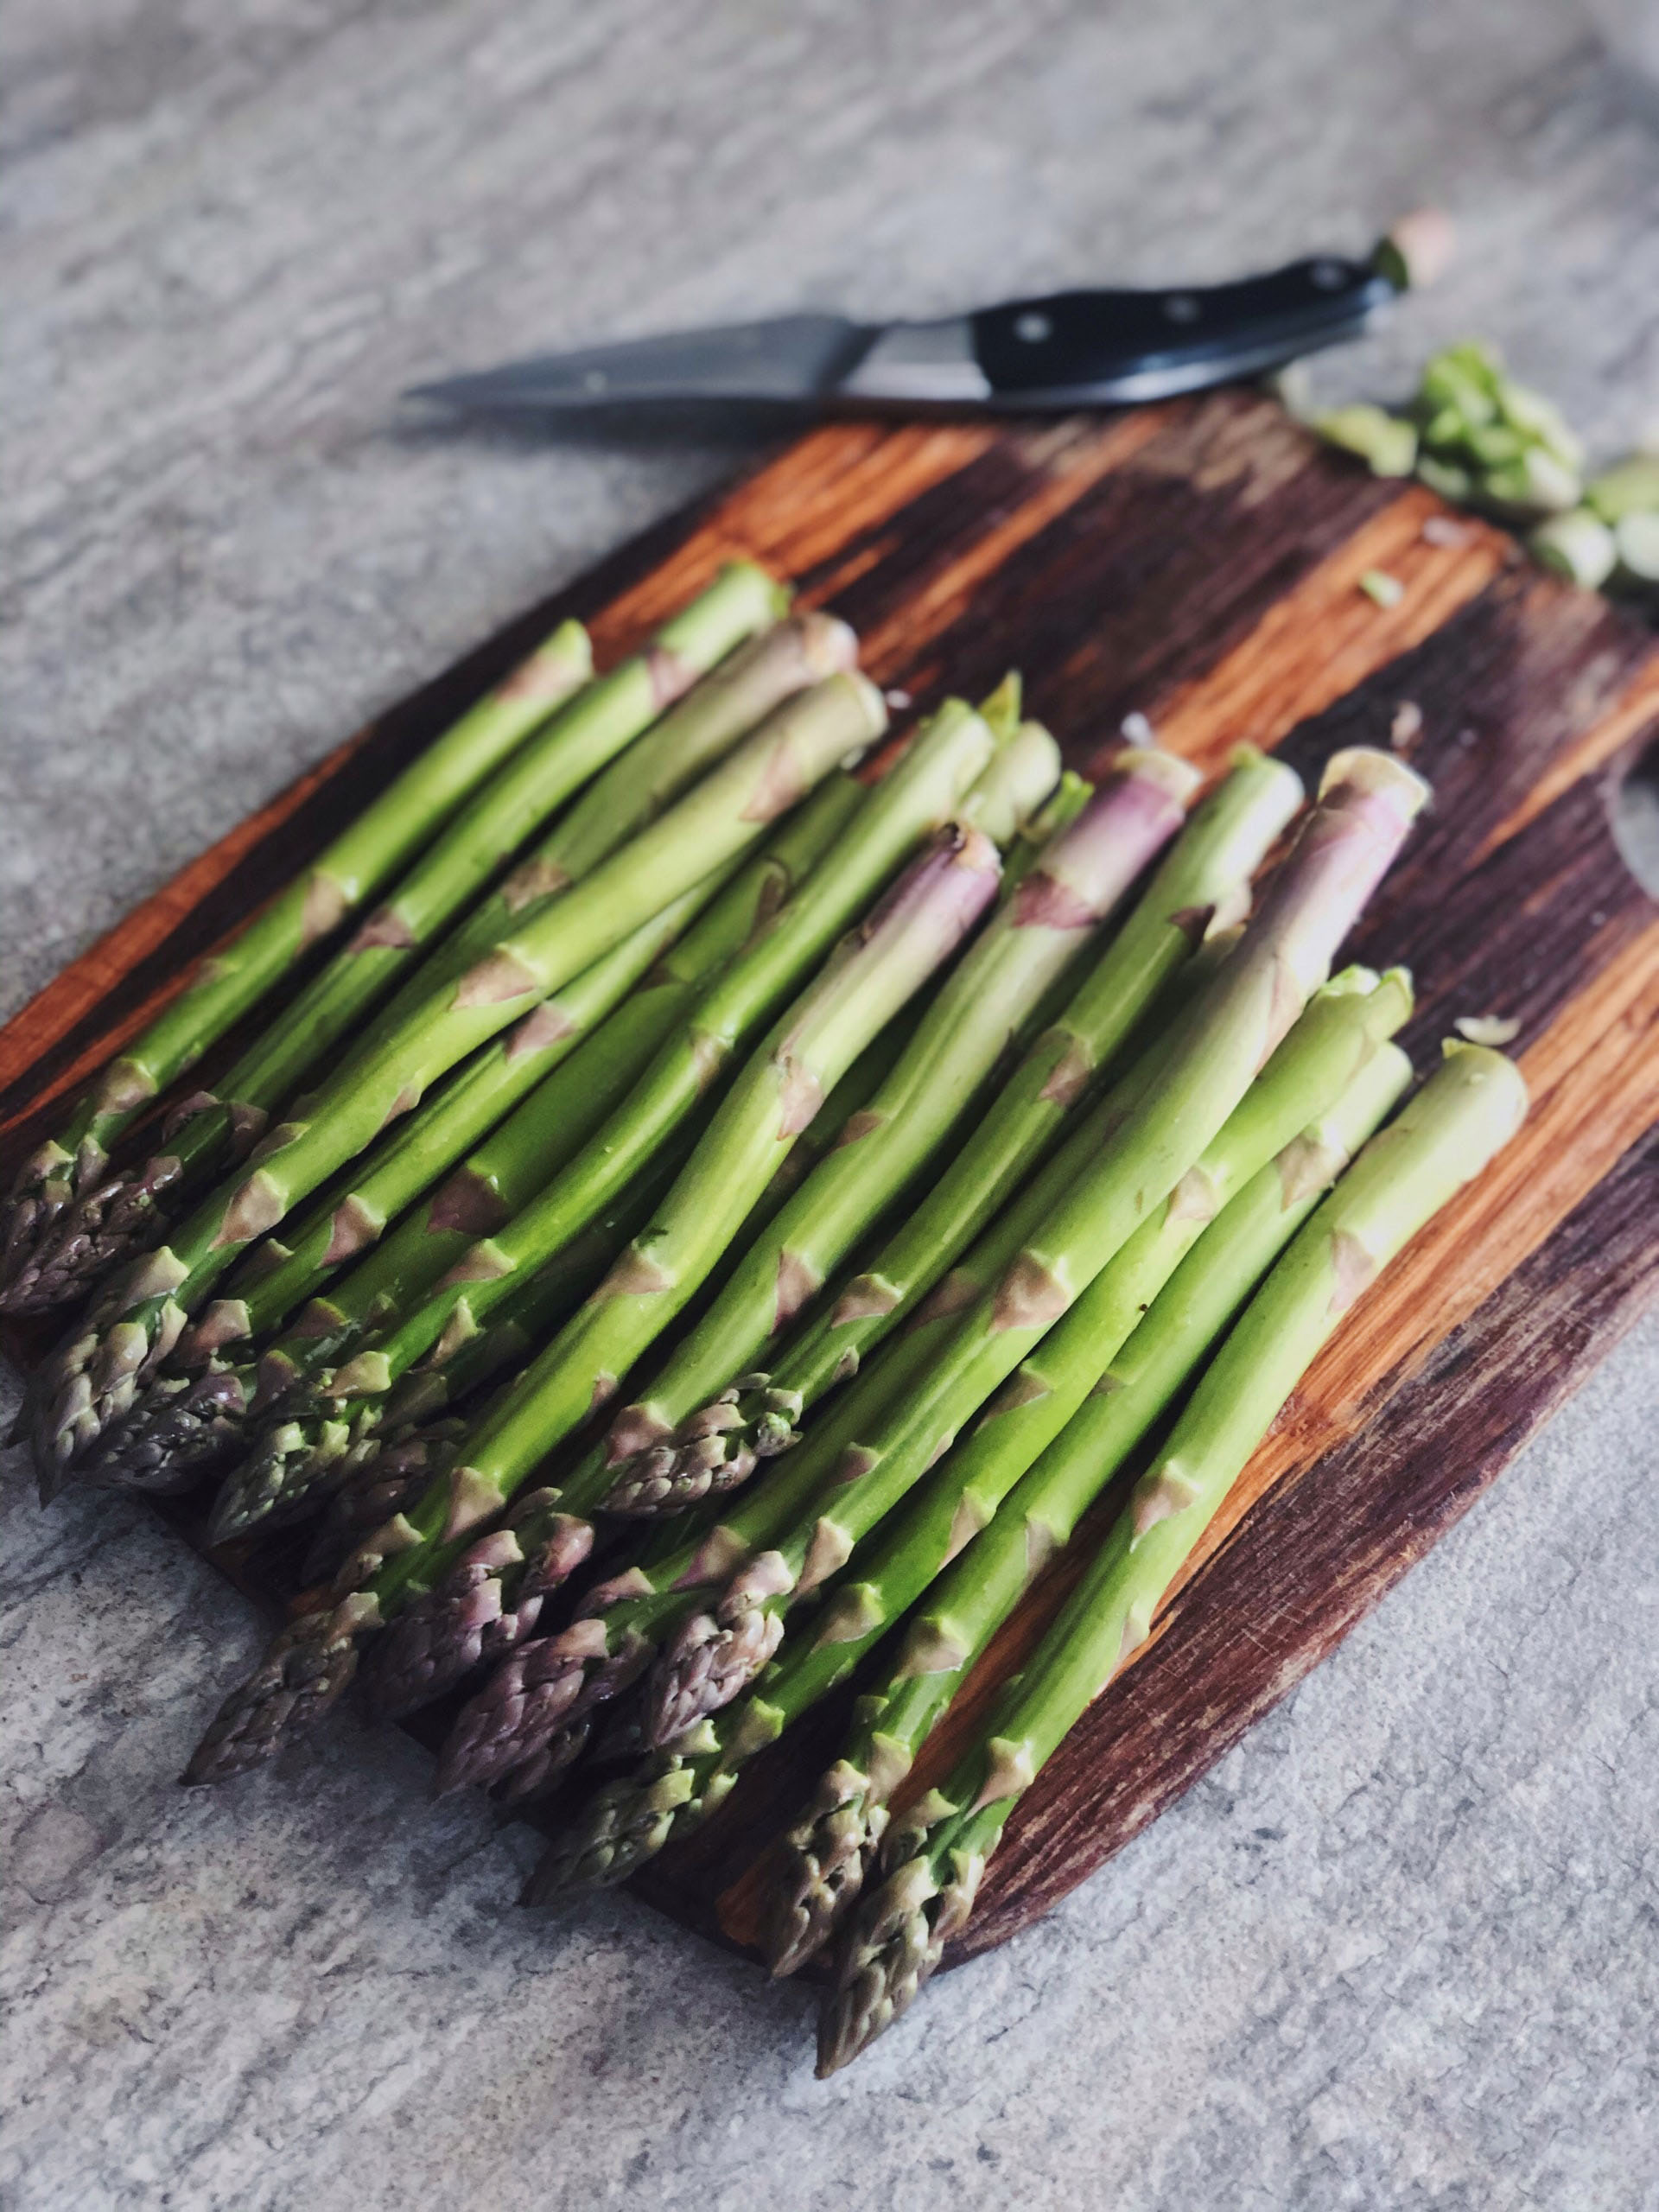 Asparagus on a wooden cutting board.